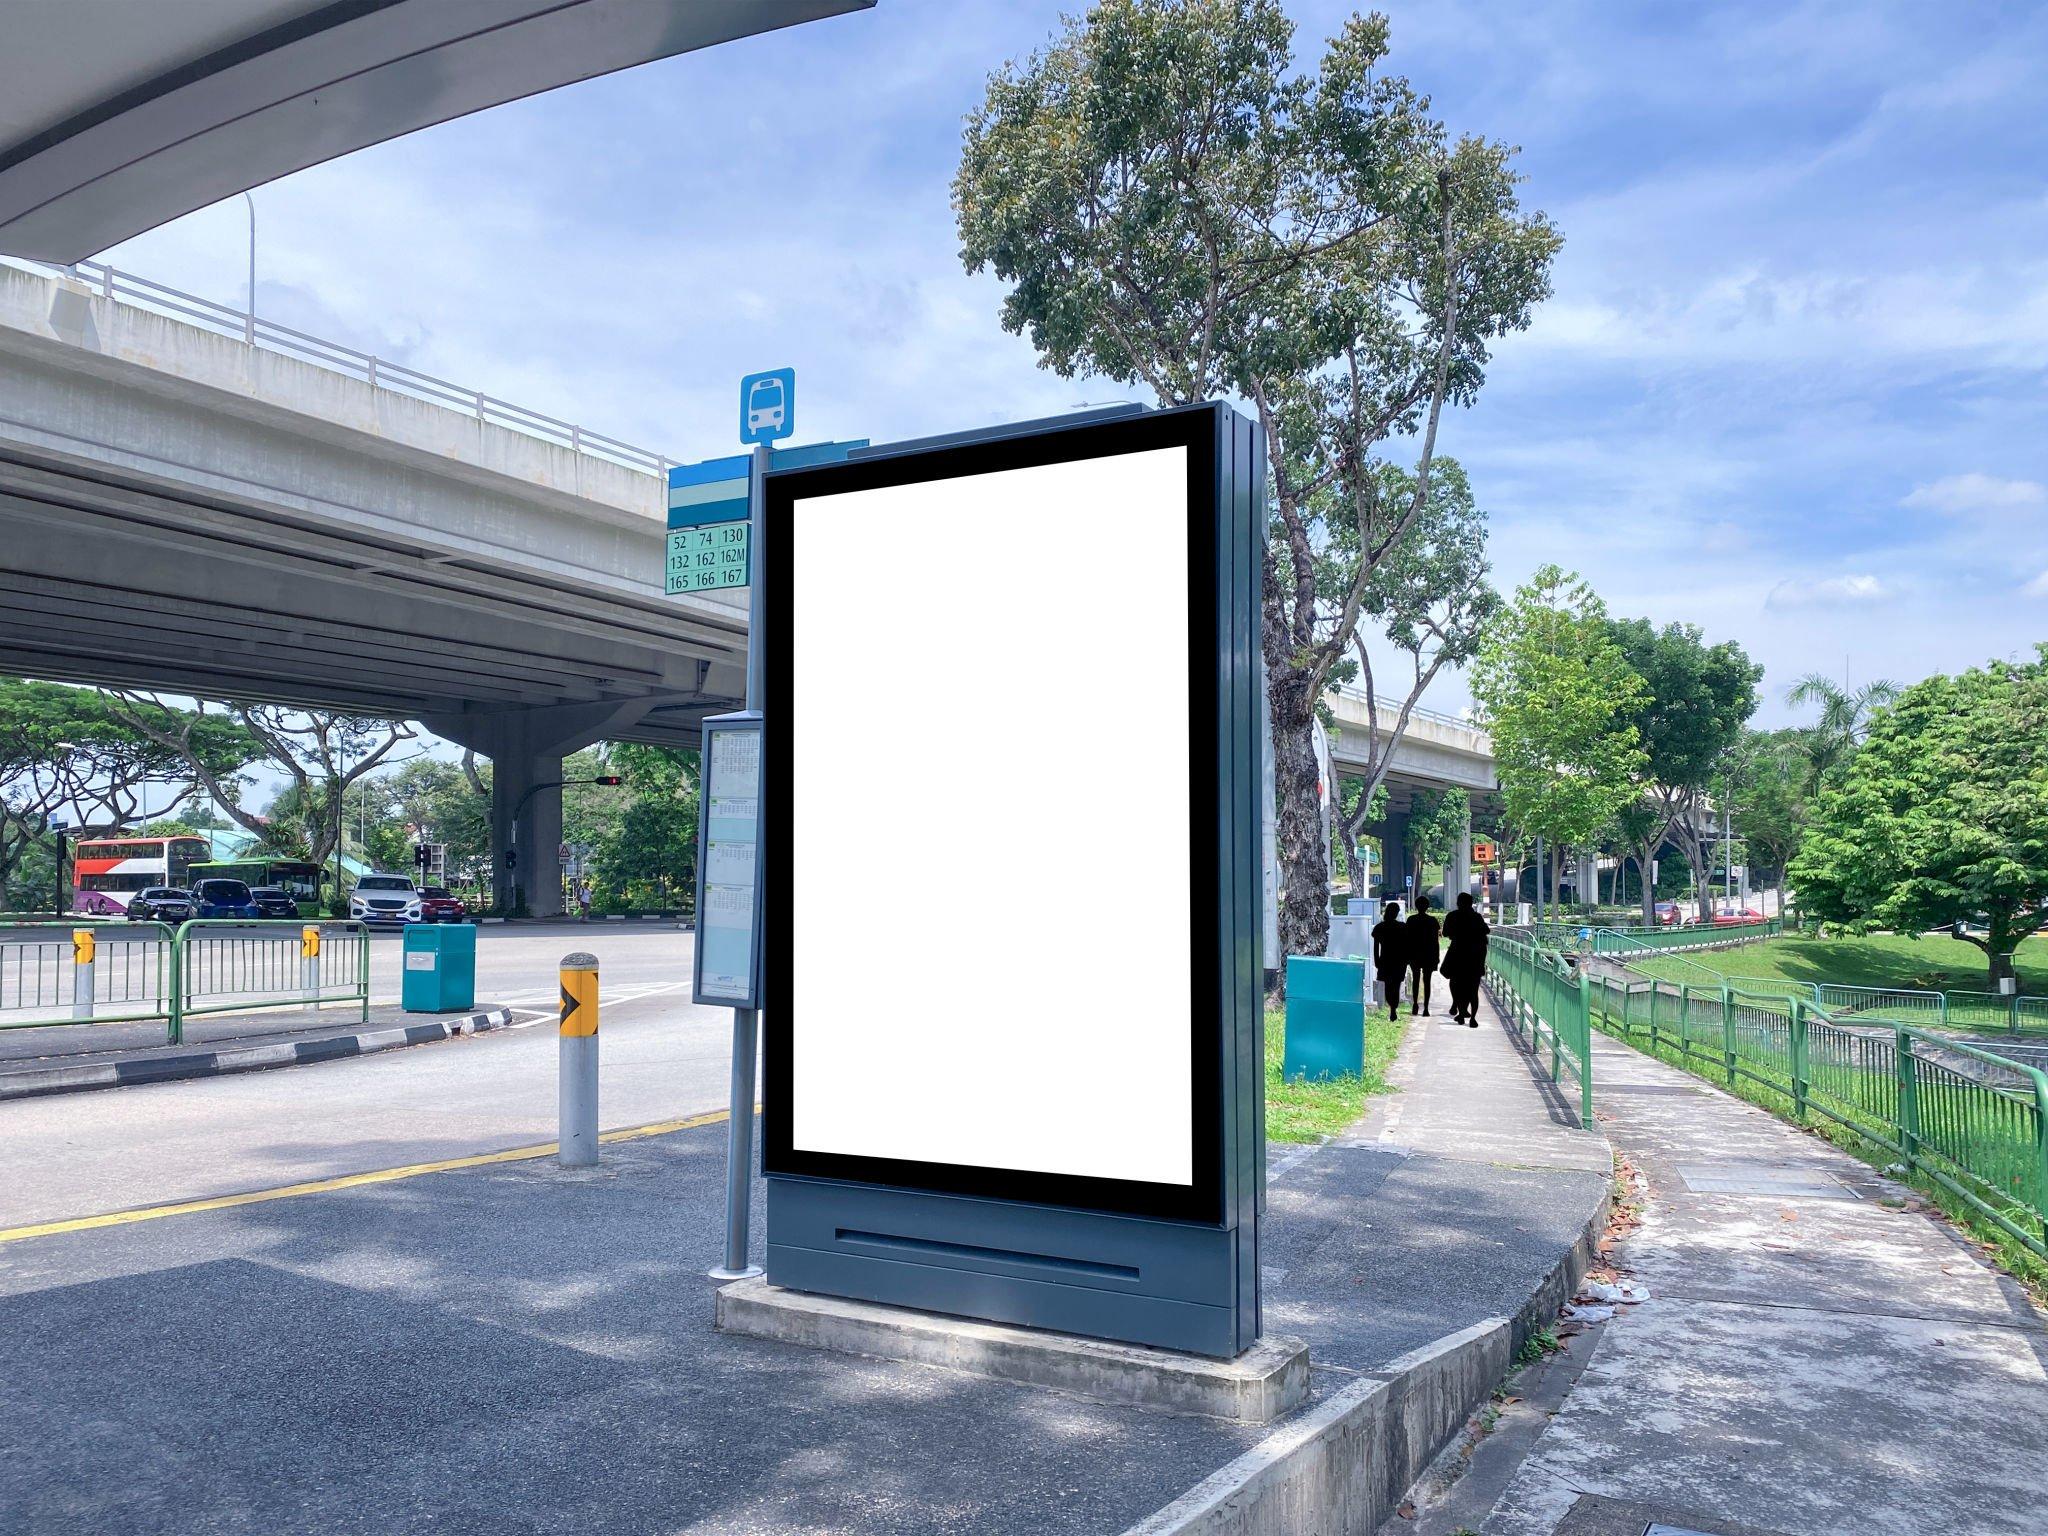 Why is Digital Signage Important?